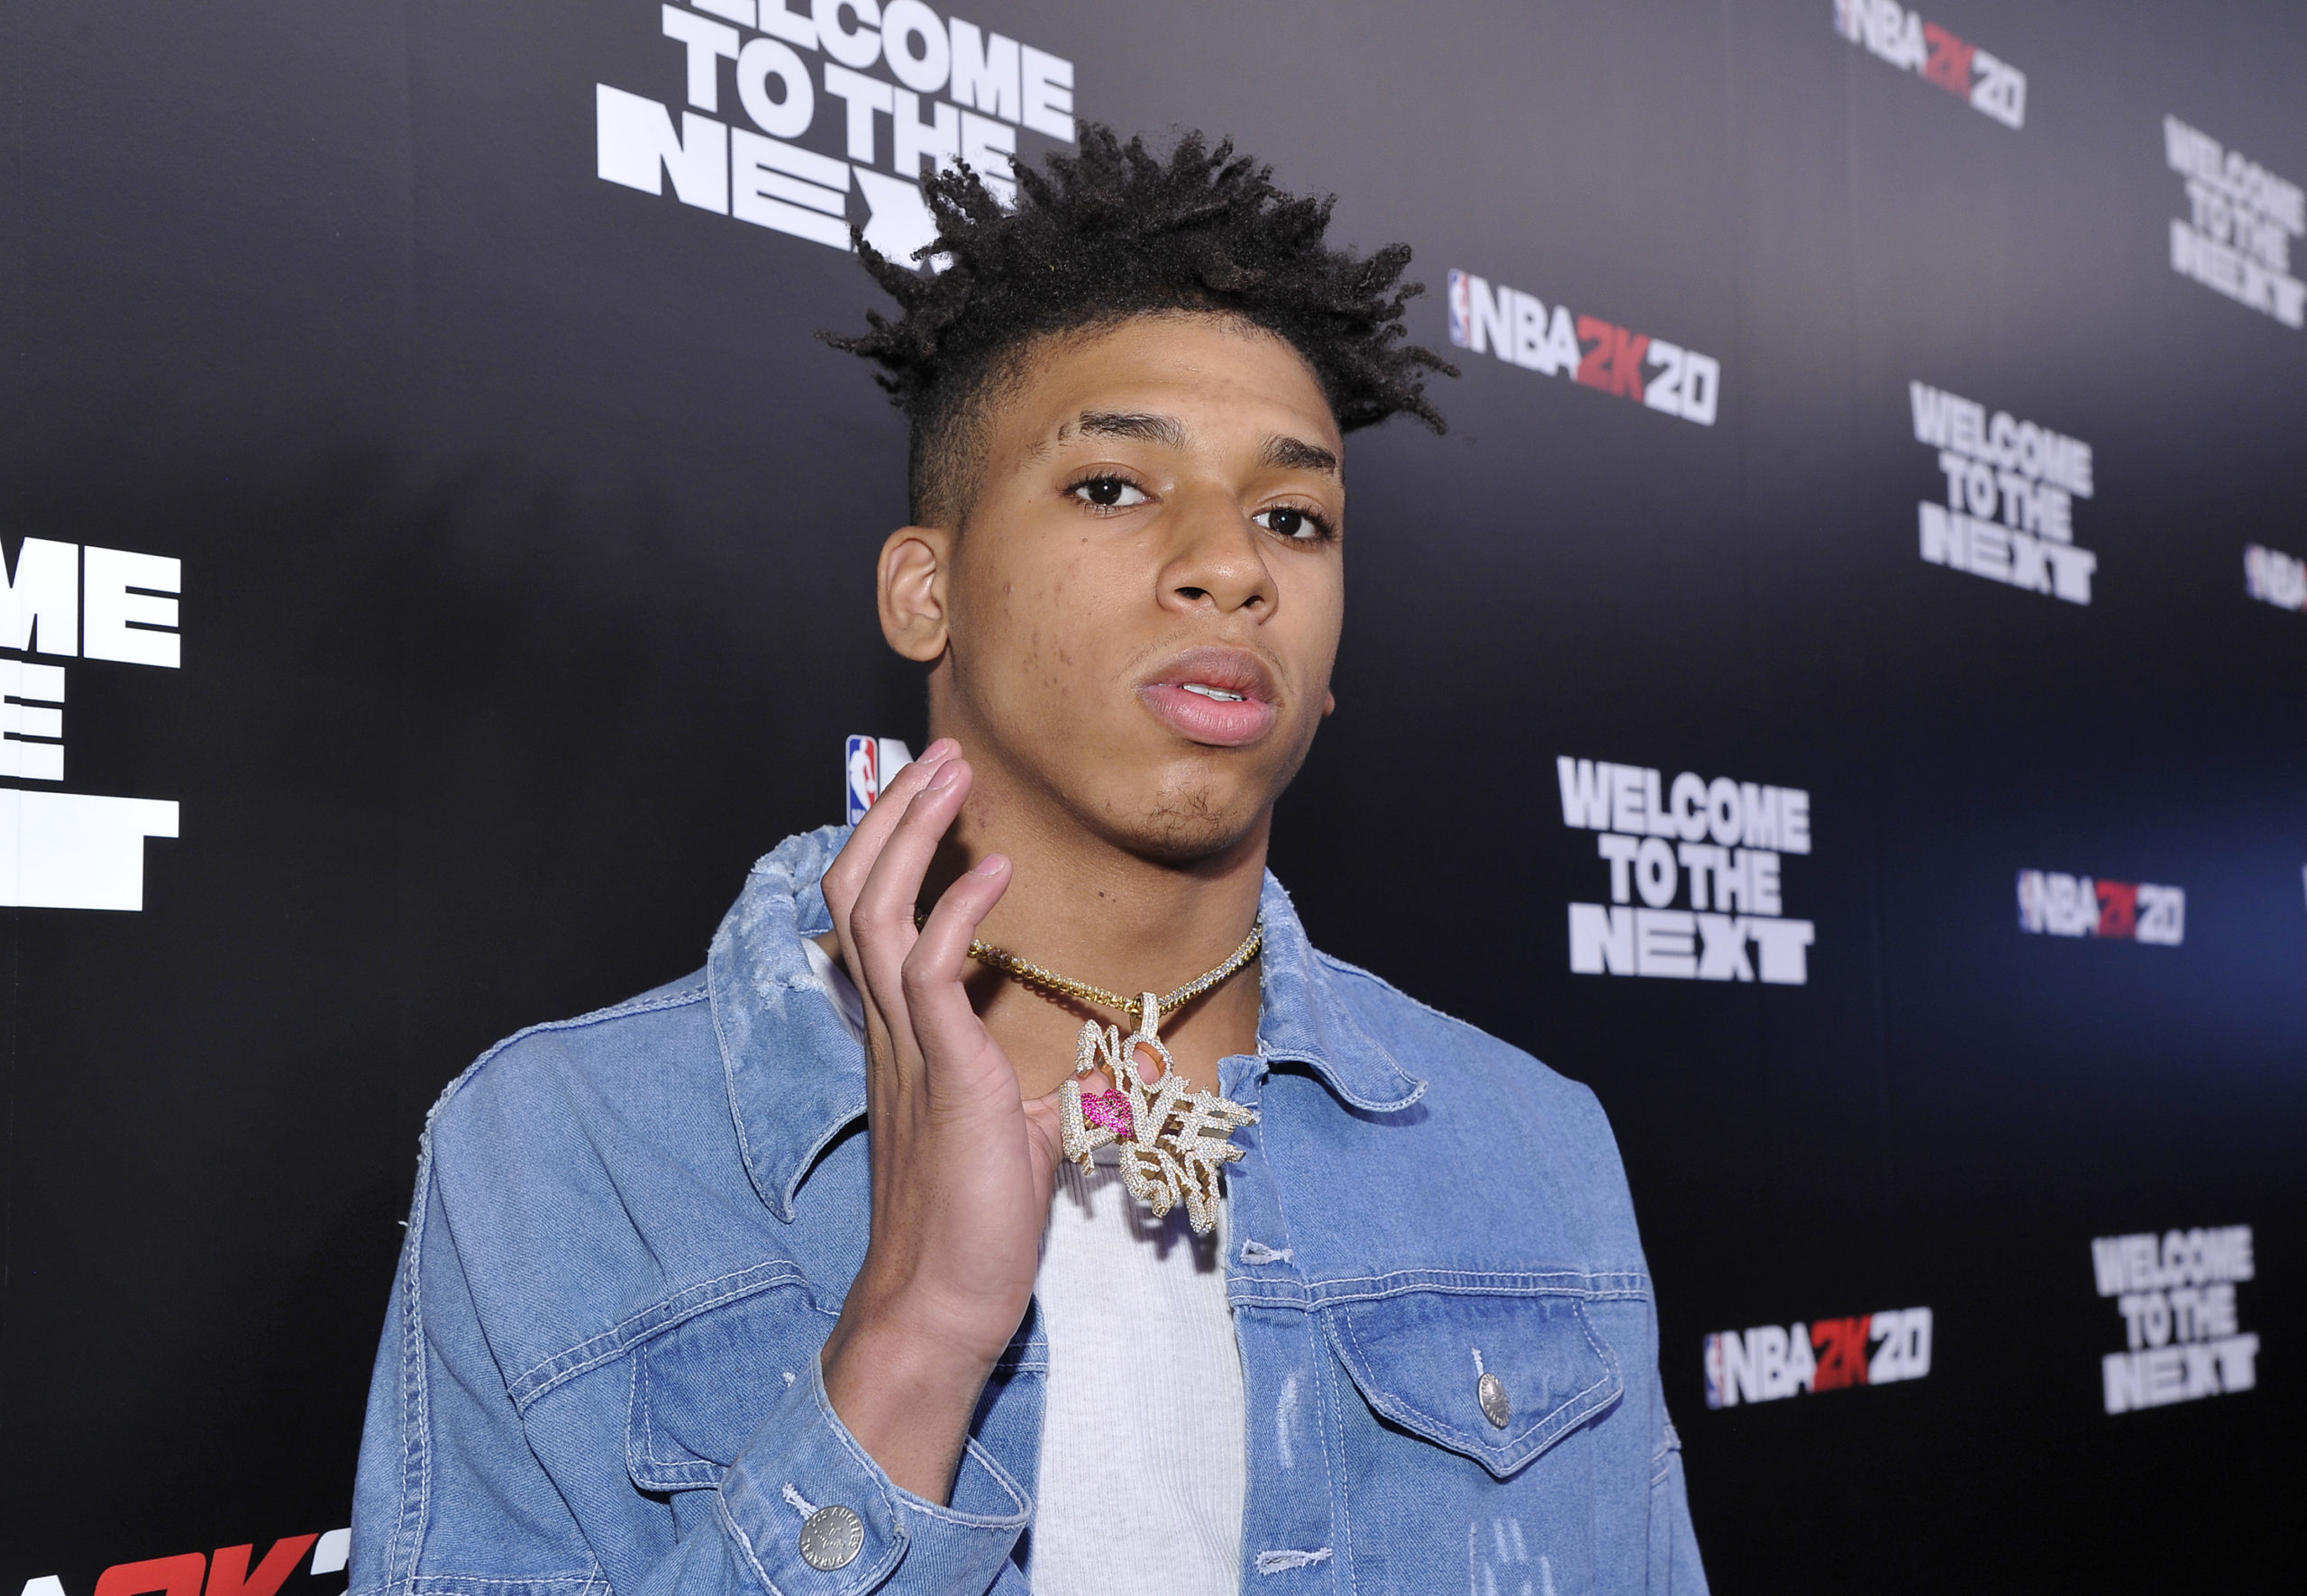 'About to Help My People' Rapper NLE Choppa Announces He Wants to Quit